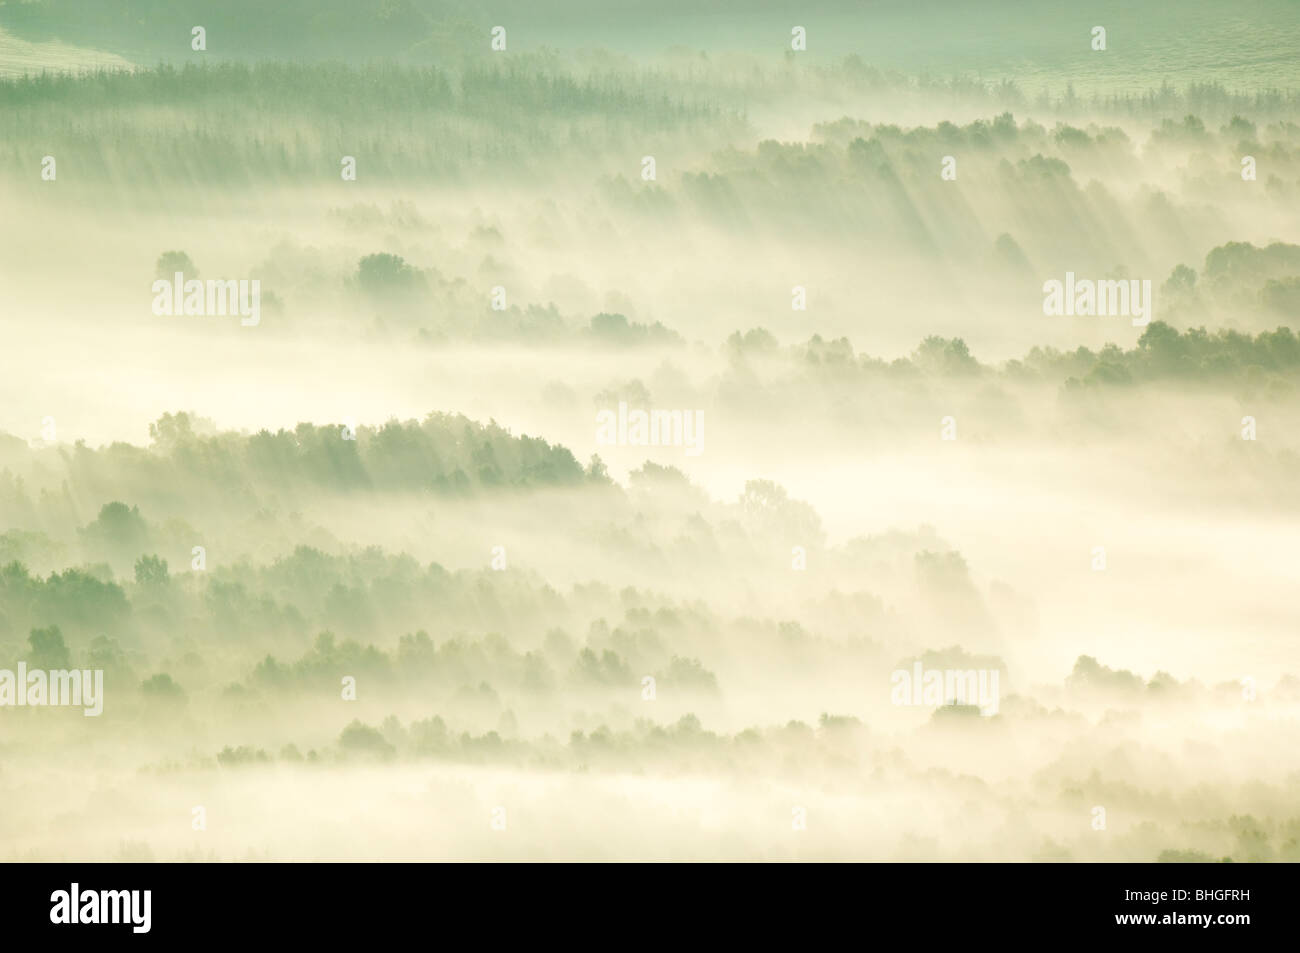 Inversion fog in the early morning lying over forest in the Dee valley near Banchory, Scotland. Stock Photo